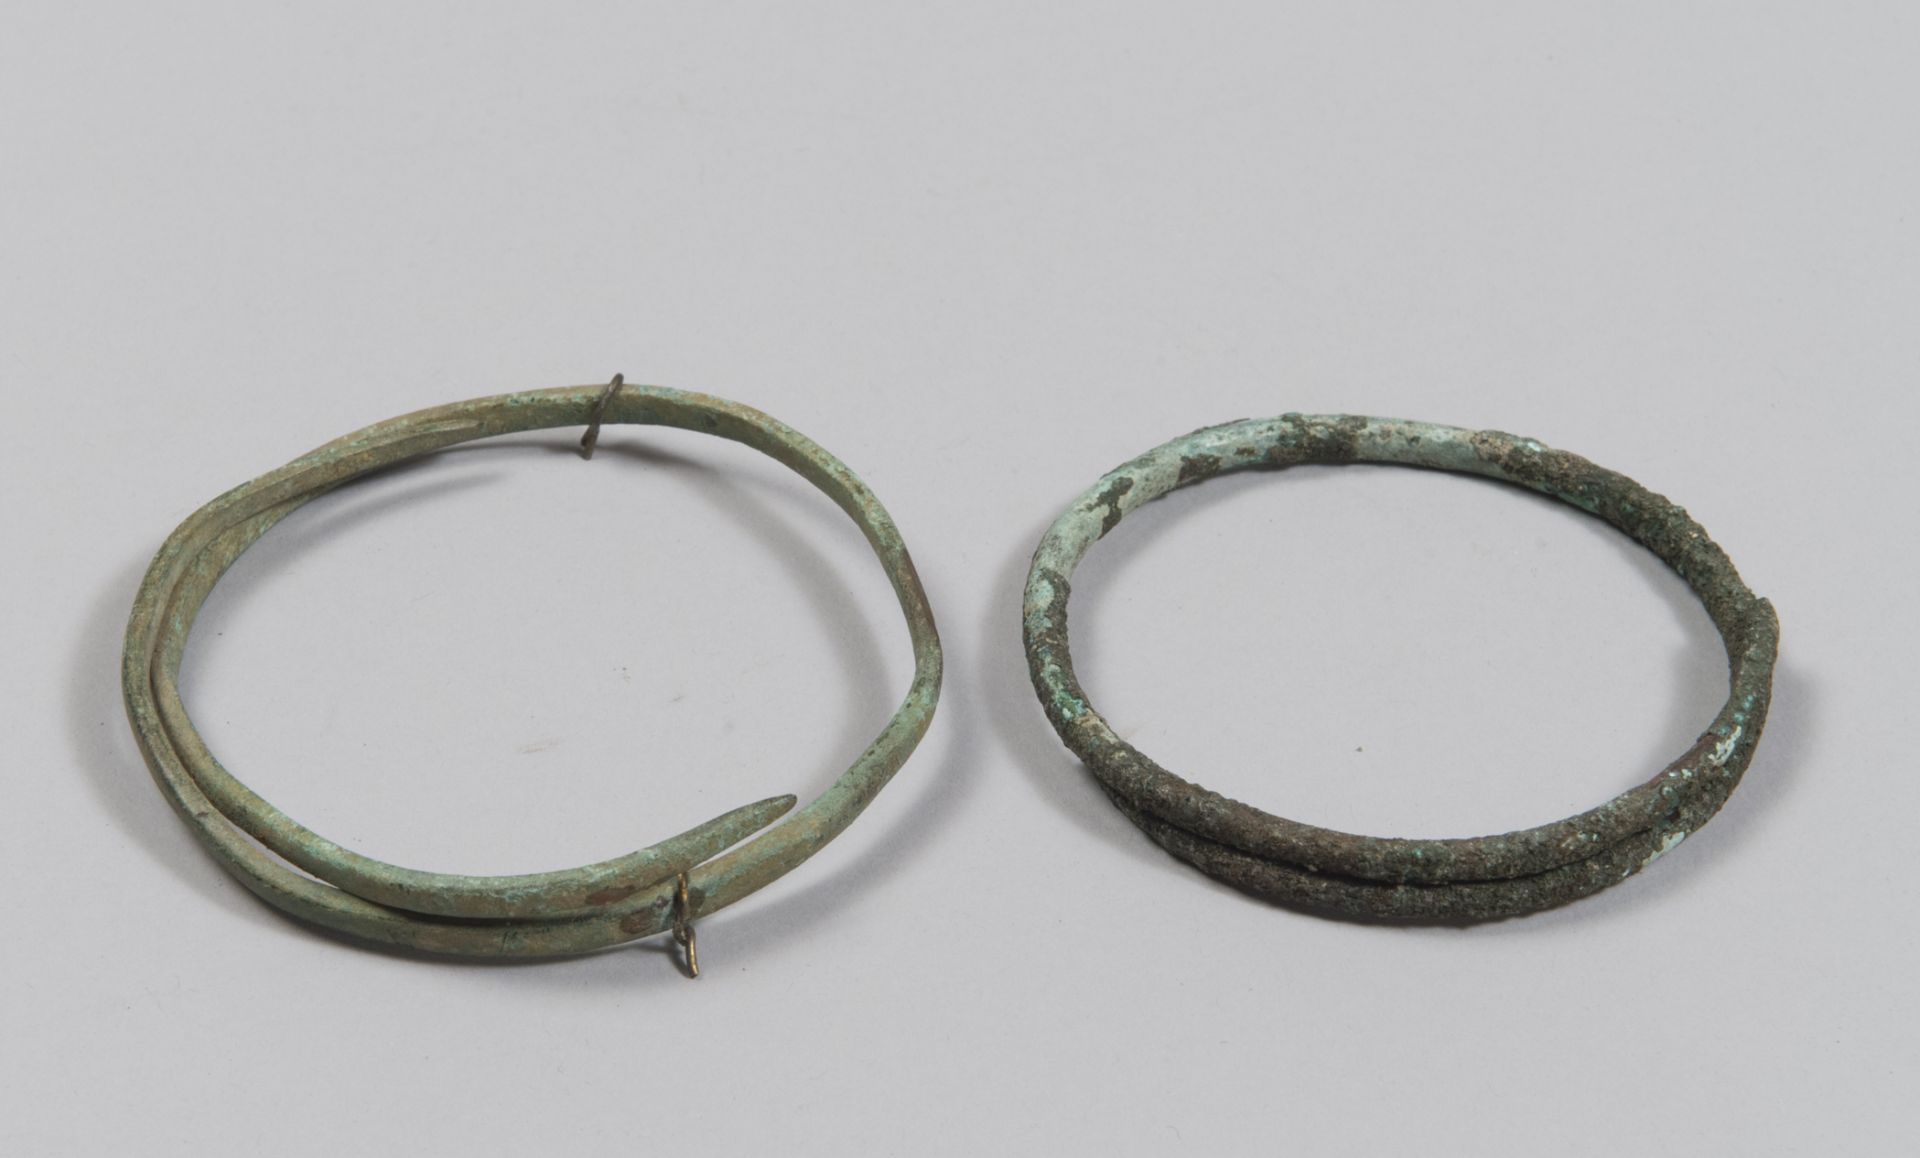 TWO ETRUSCAN BRONZE ARMILLS, 8TH-6TH CENTURY B.C. a smooth rod with a circular section and the other